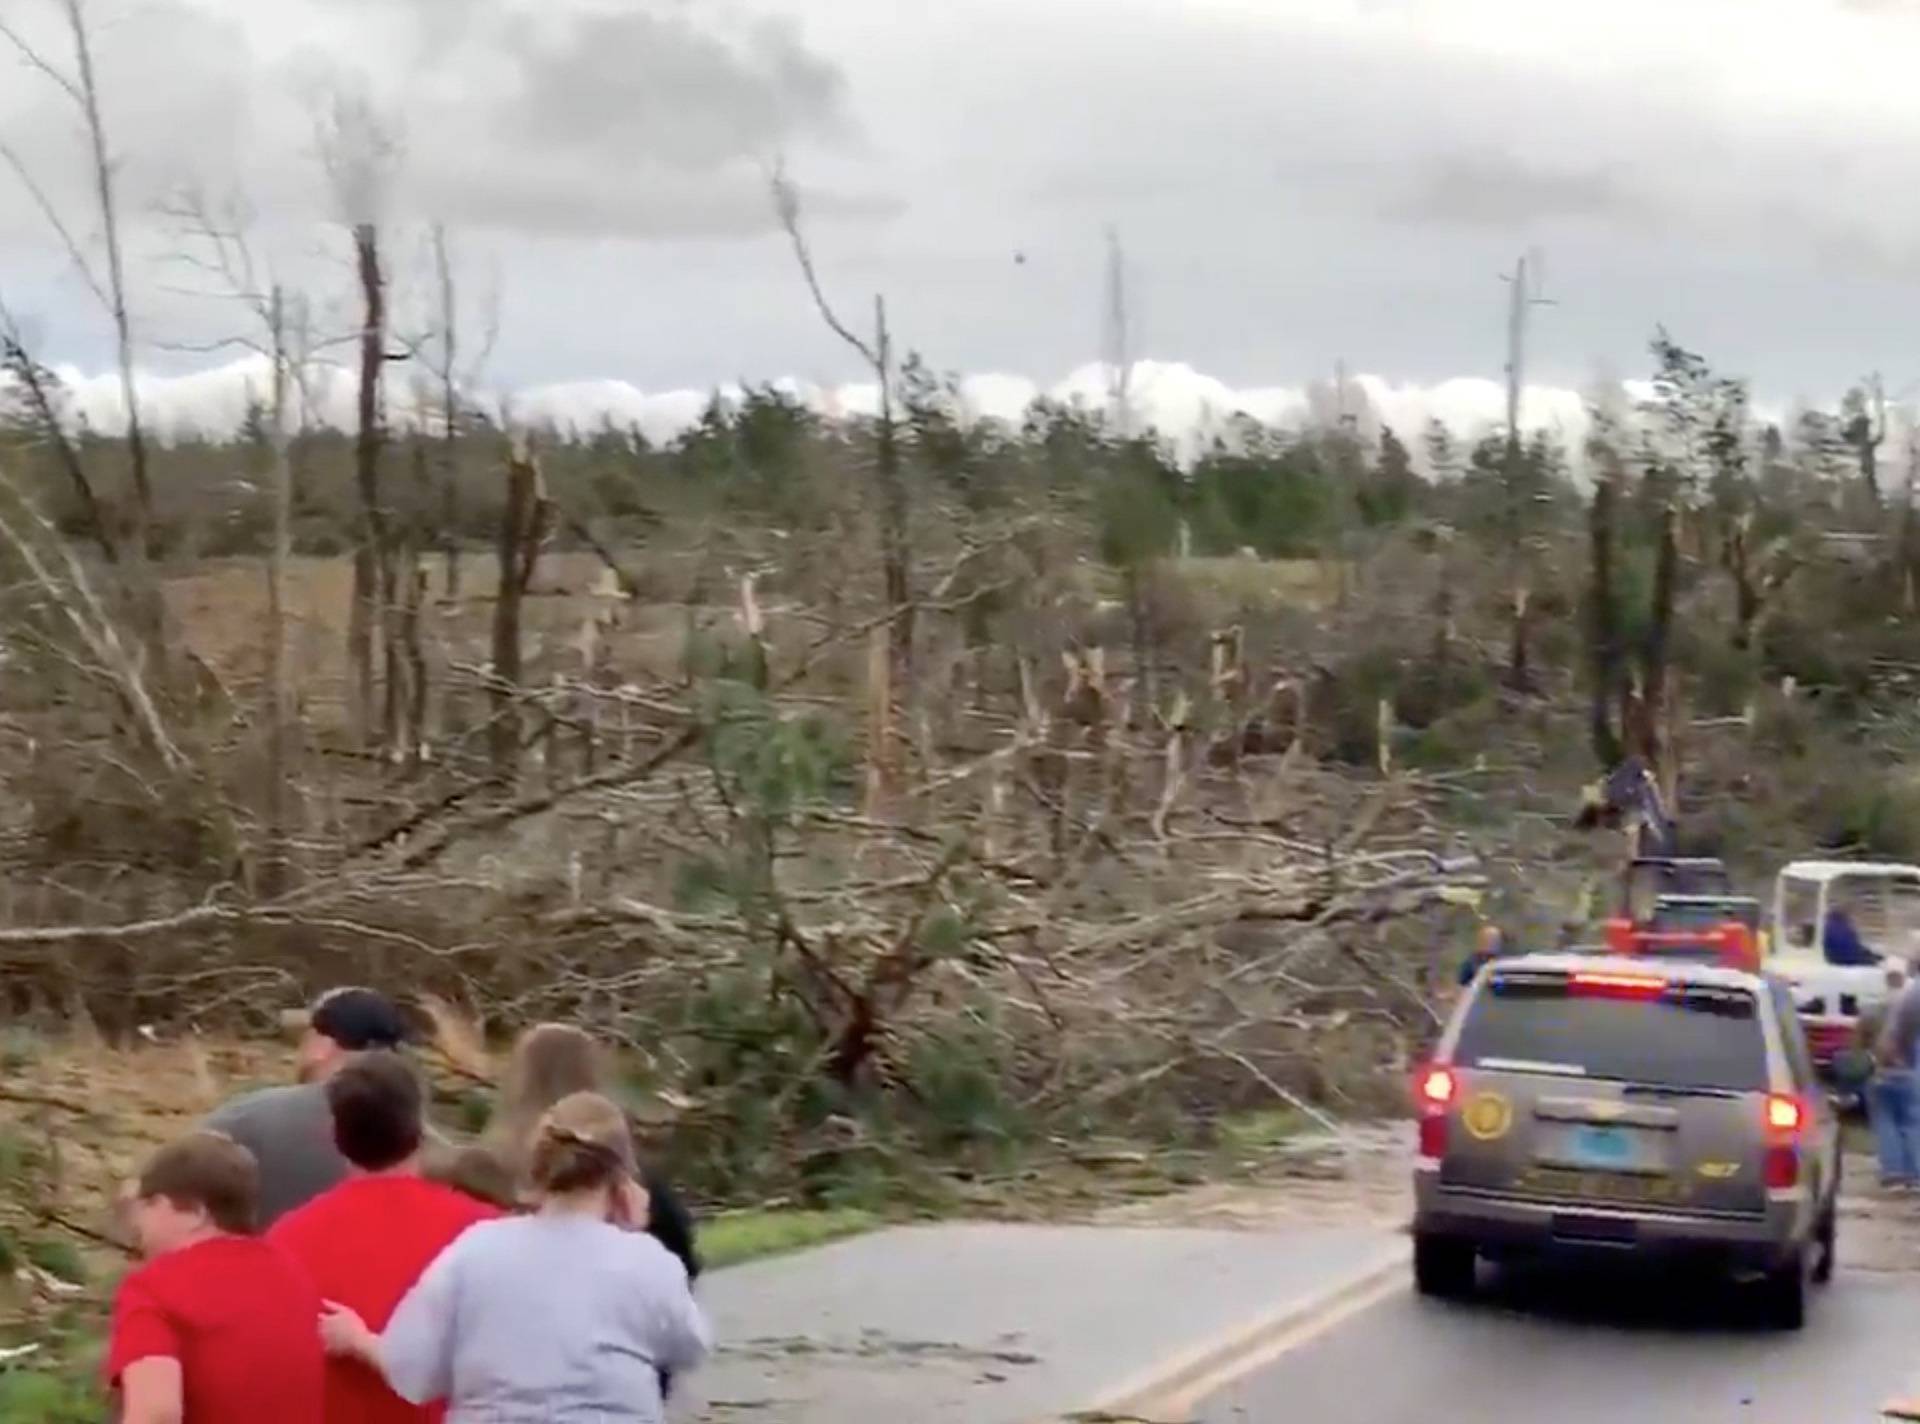 People look on as debris is cleared along a road following a tornado in Beauregard, Alabama, U.S. in this March 3, 2019 still image obtained from social media video